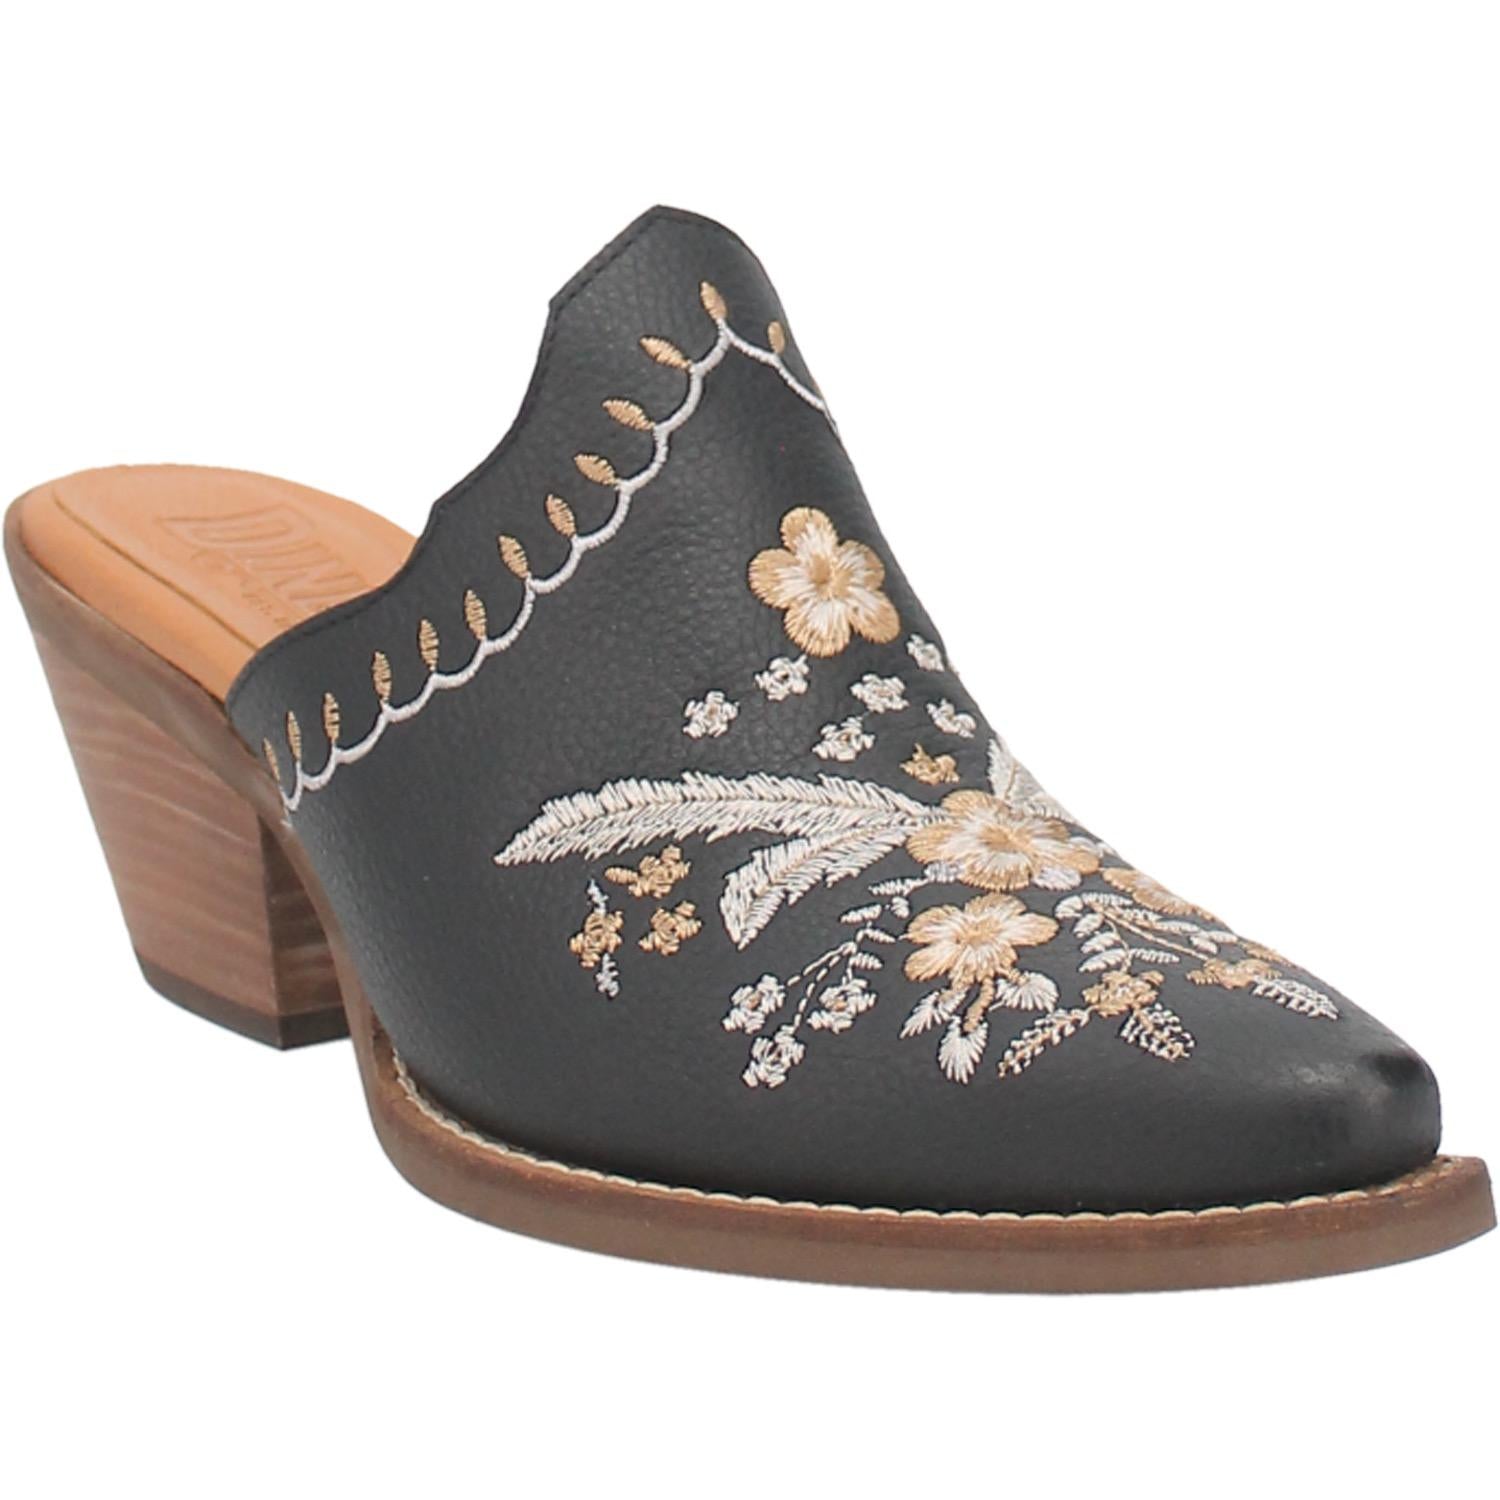 Wildflower Black Embroidered Floral Leather Mules (DS)